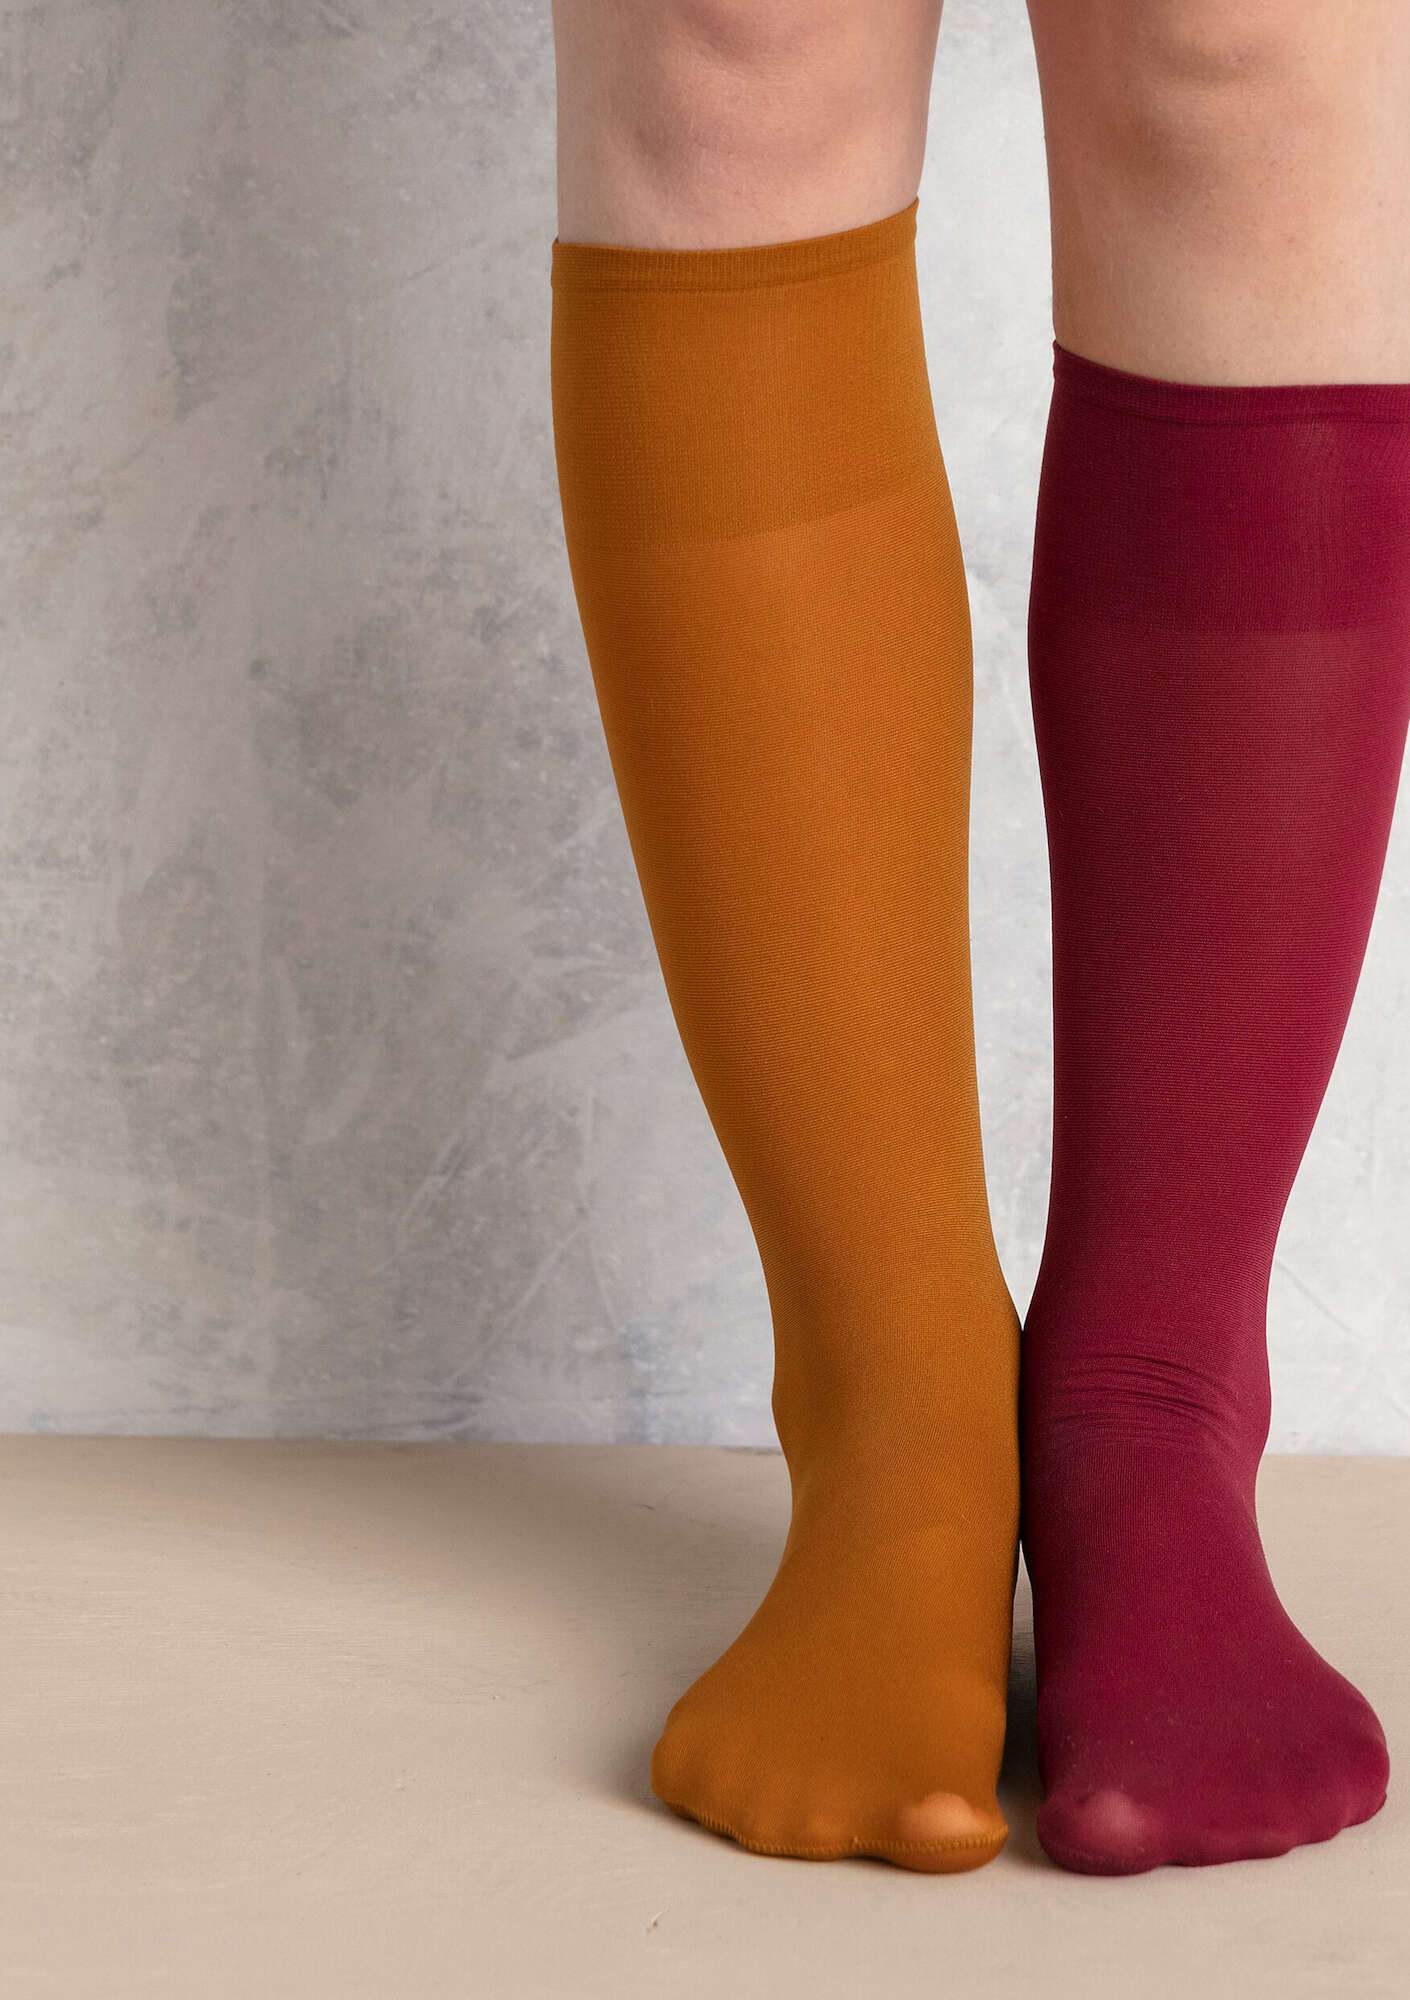 Solid-color knee-highs in recycled nylon curry